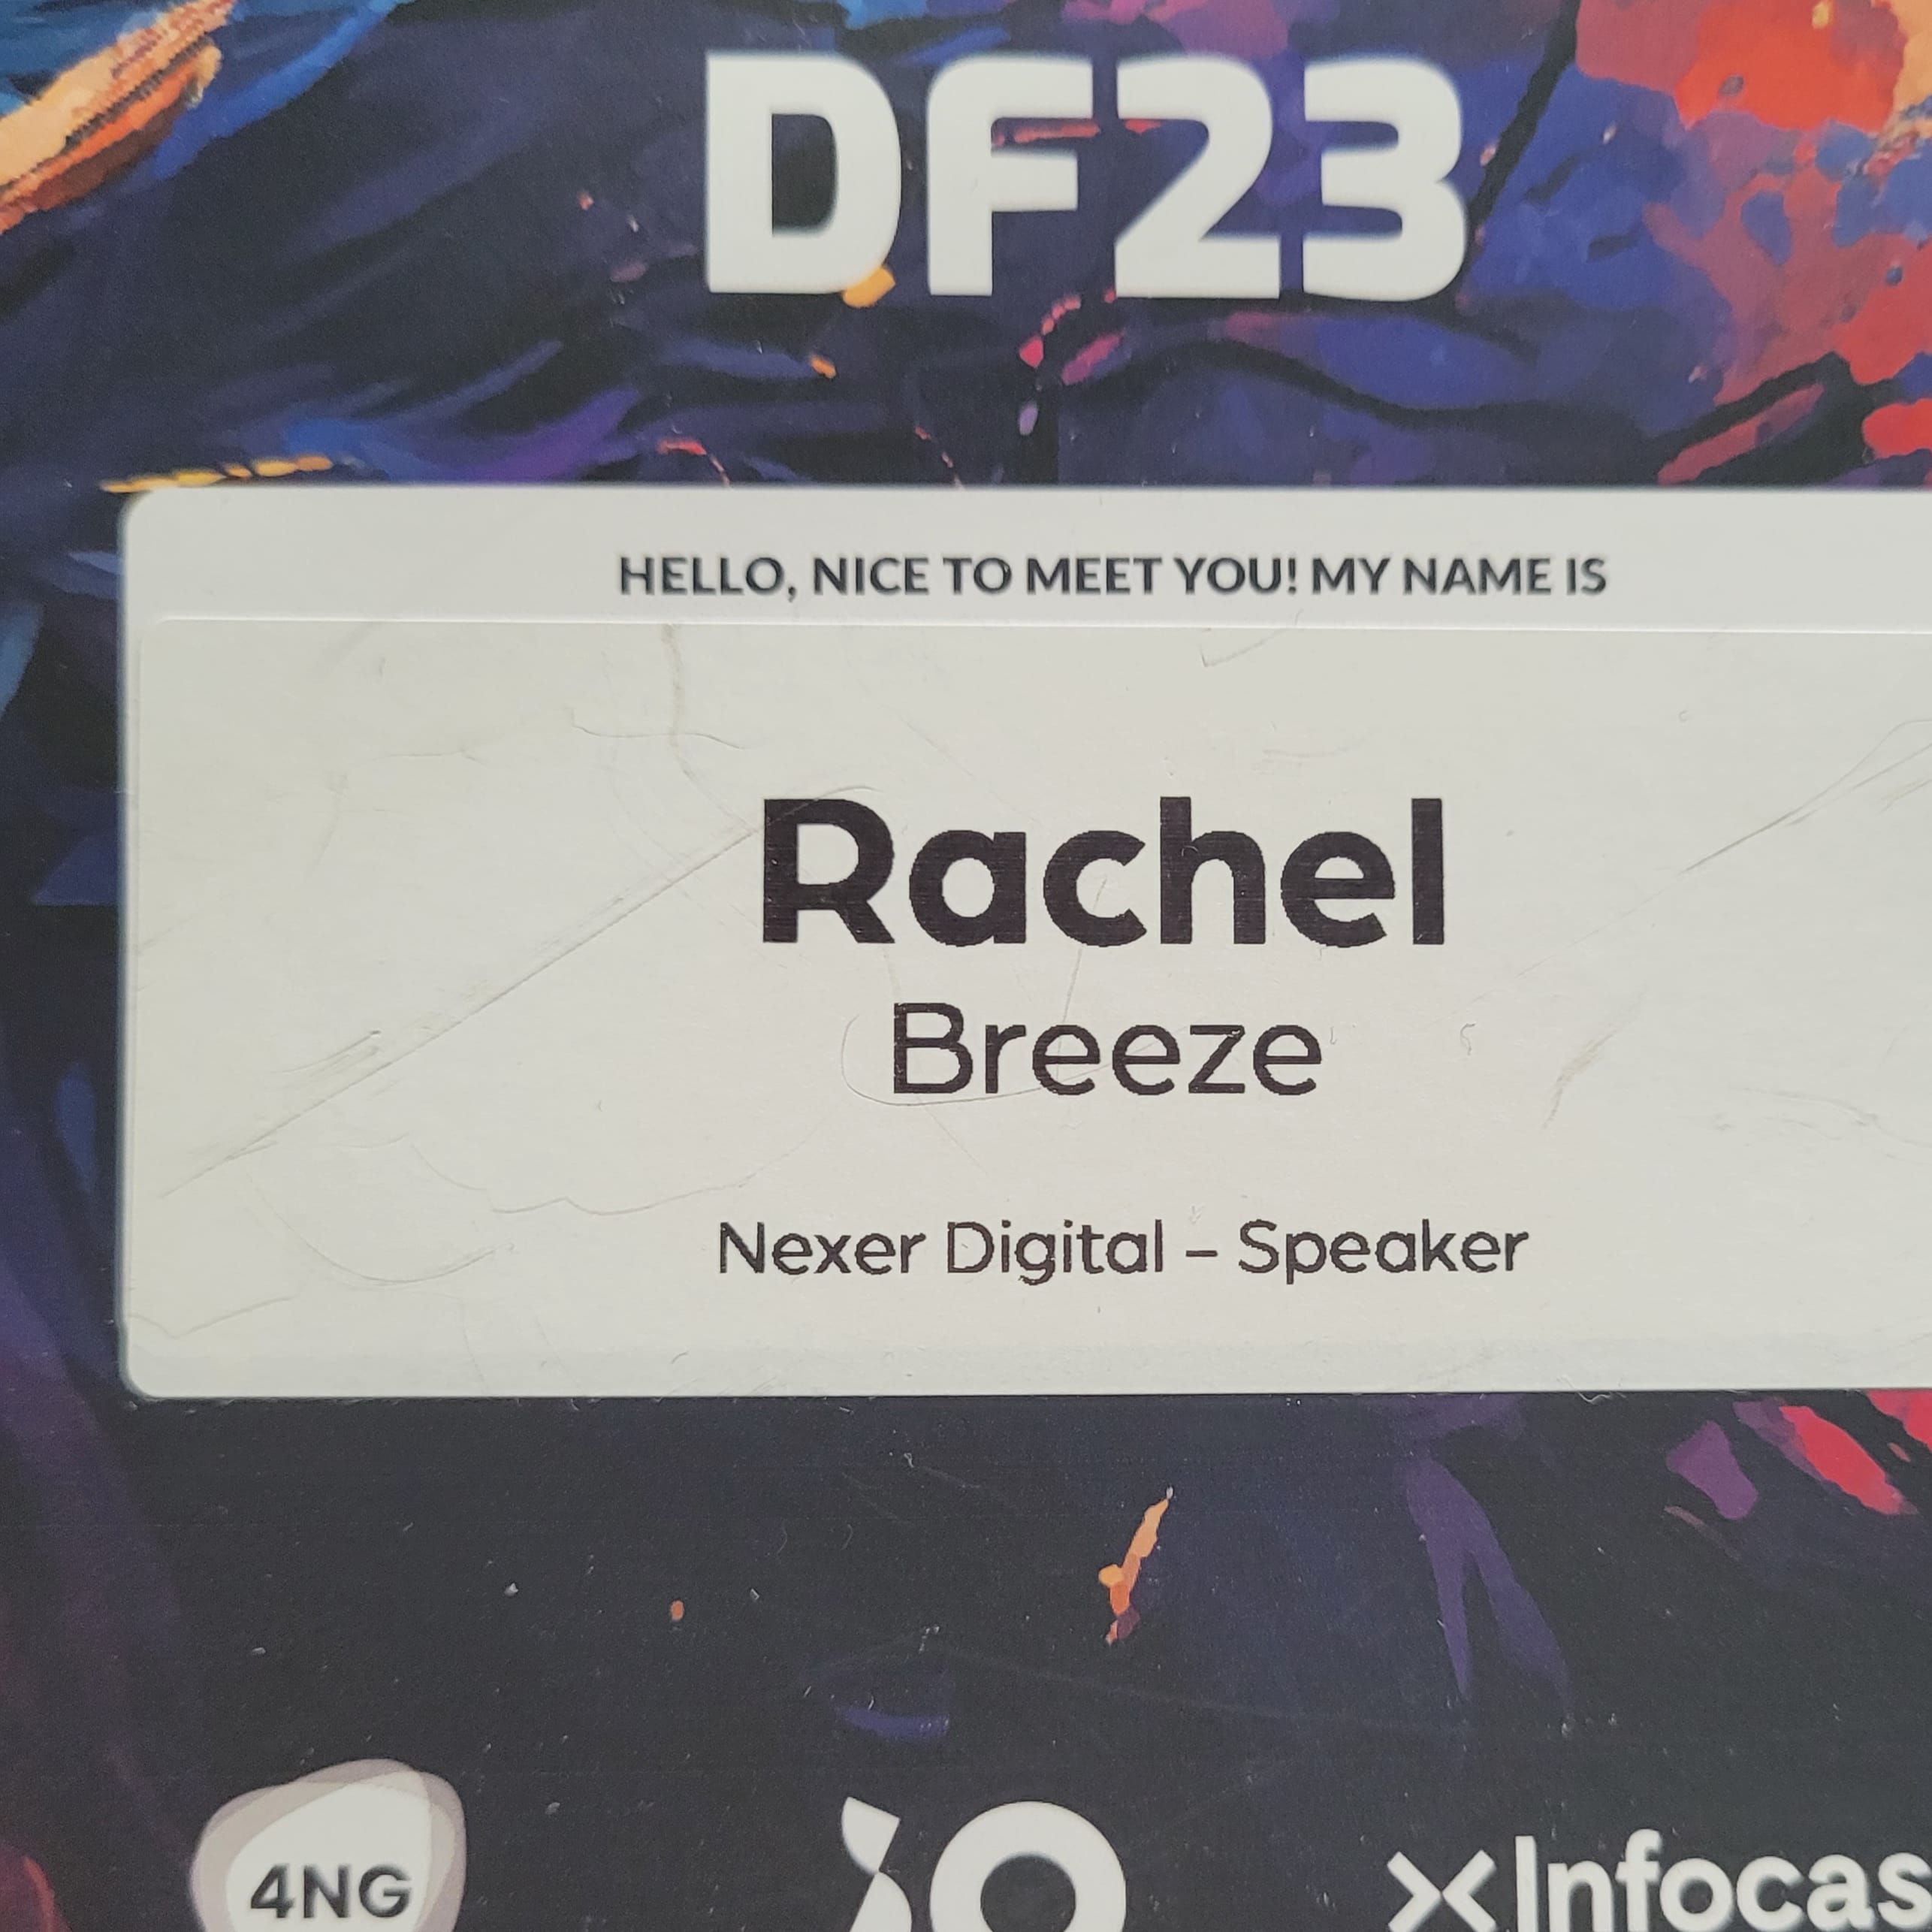 DF23 speaker pass, with my name and my company's name "Nexer Digital" on it